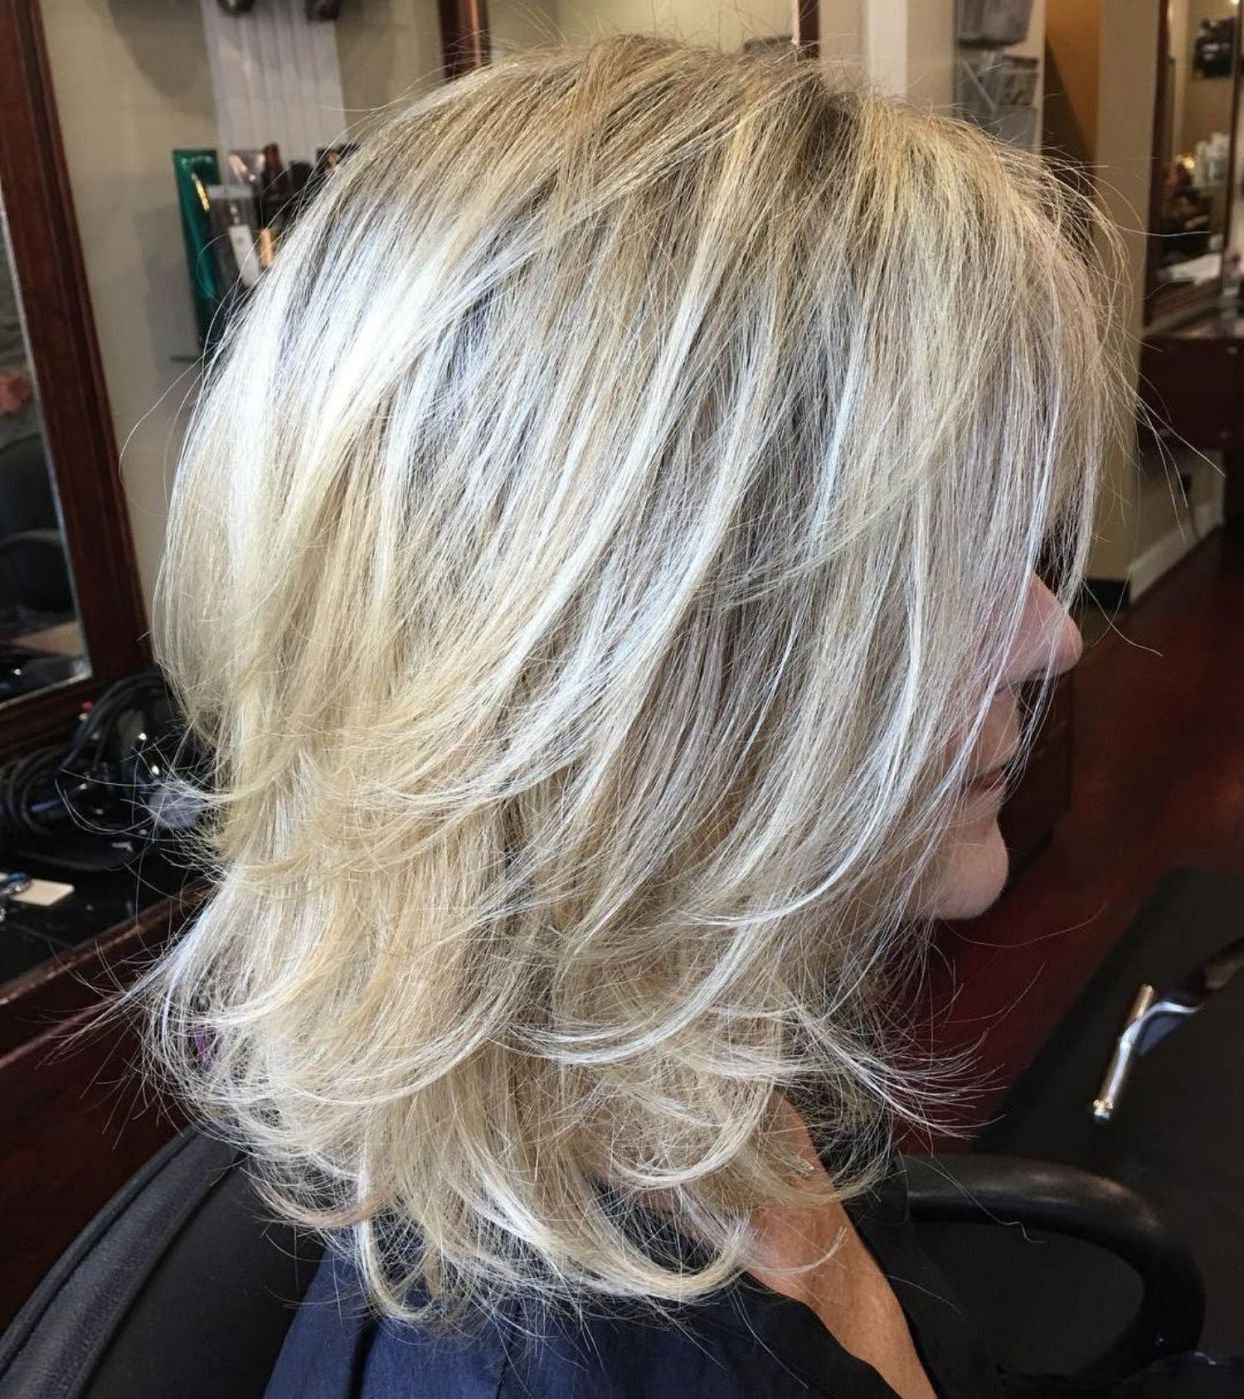 Most Recent Beach Blonde Medium Shag Haircuts Intended For Pin On Beauty: Skin, Hair & Nails (View 2 of 20)